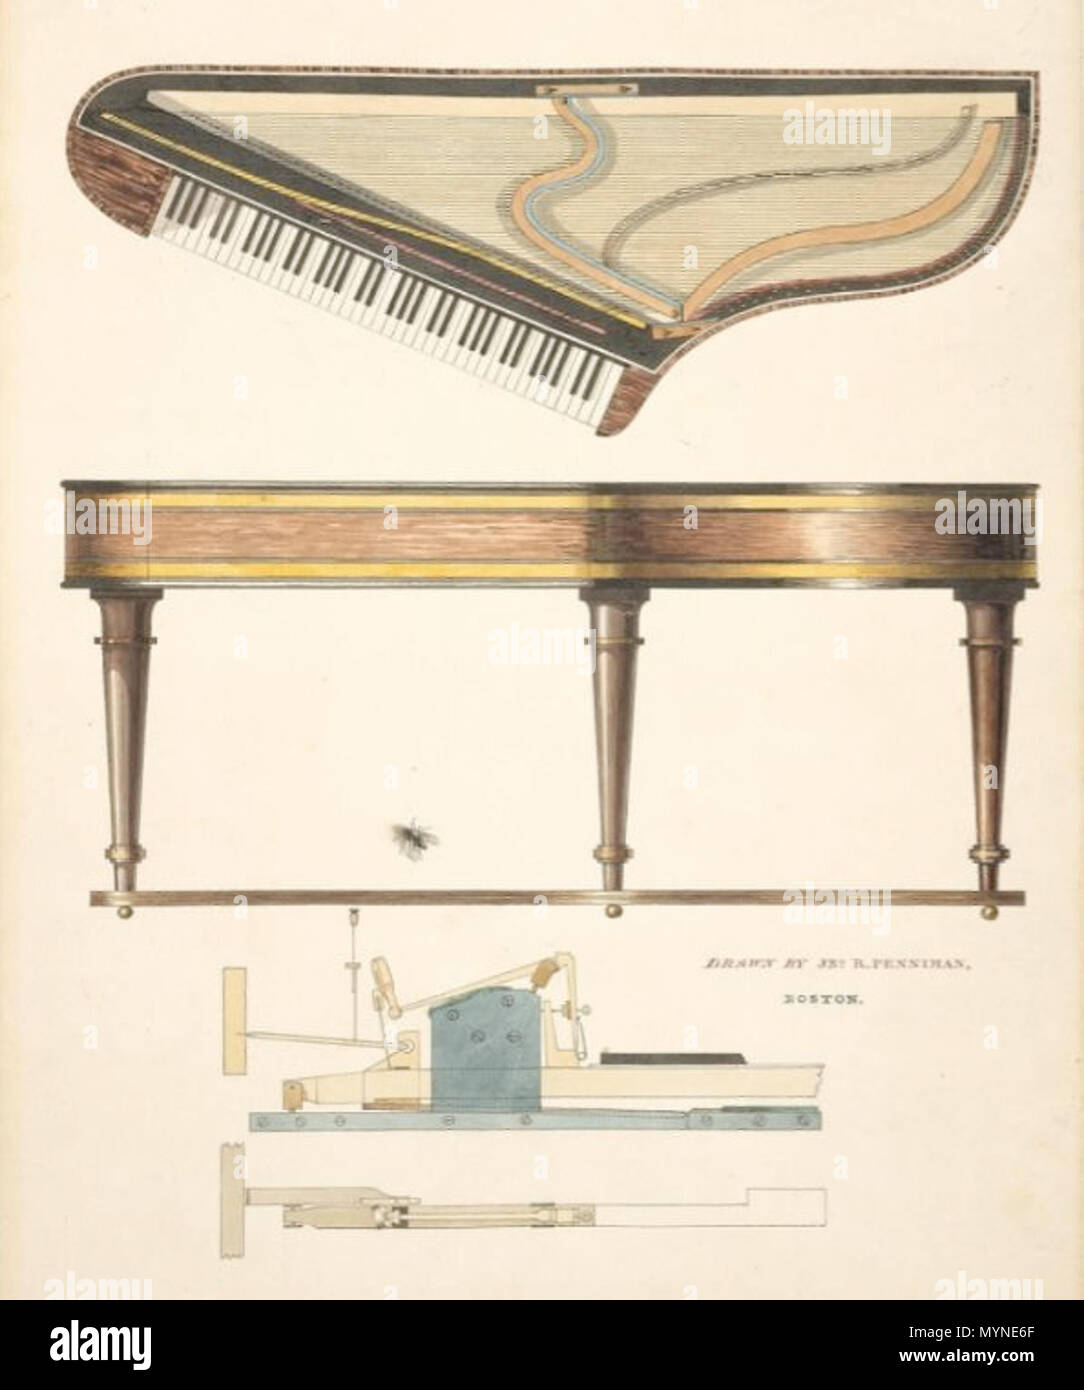 English: Piano in the Shape of a Bentside Spinet. about 1830. By John Ritto  Penniman, American, 1782–1841. Boston, Massachusetts, United States.  Framed: 58.4 x 47.6 cm (23 x 18 3/4 in.).